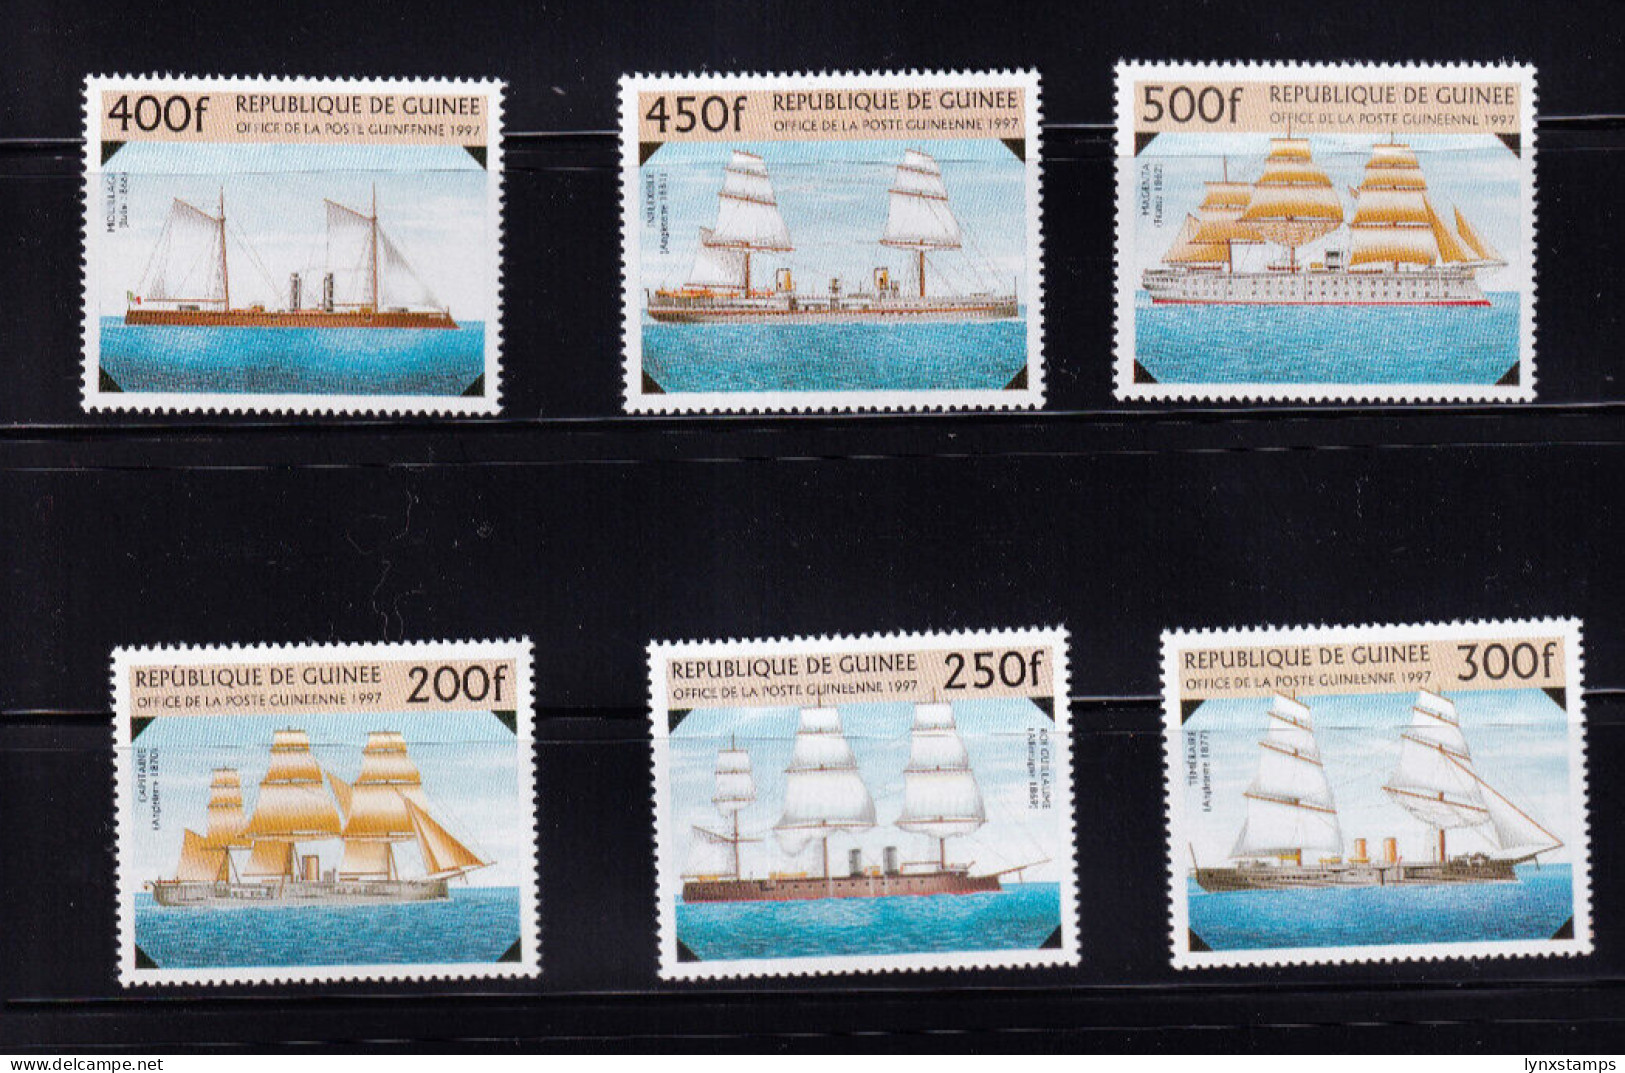 LI06 Guinea 1997 The 19th-Century Warships Mint Stamps - Guinea (1958-...)